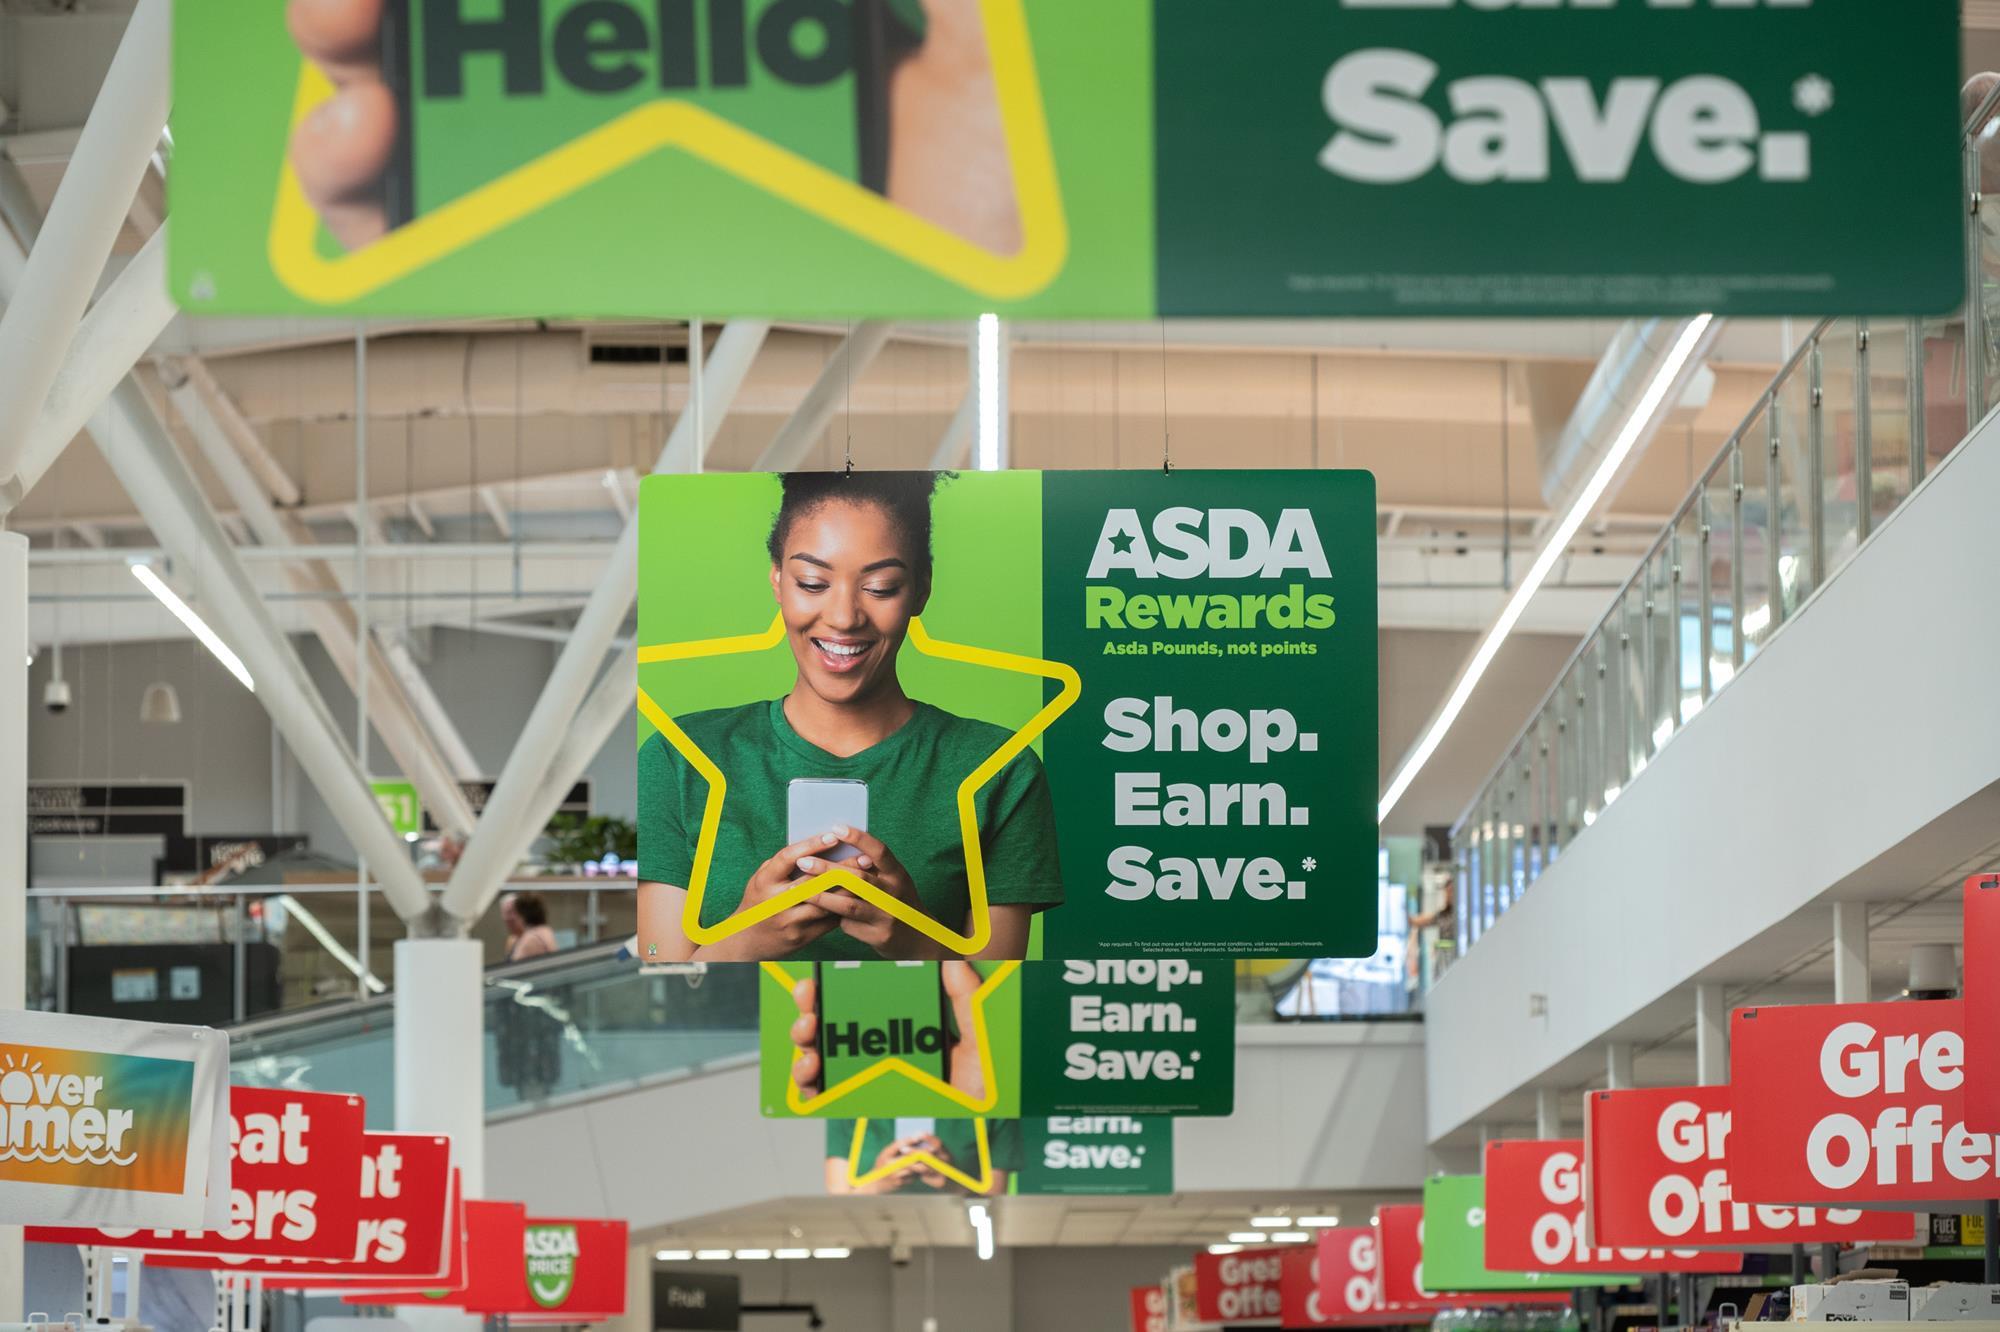 George Plus launched by Asda